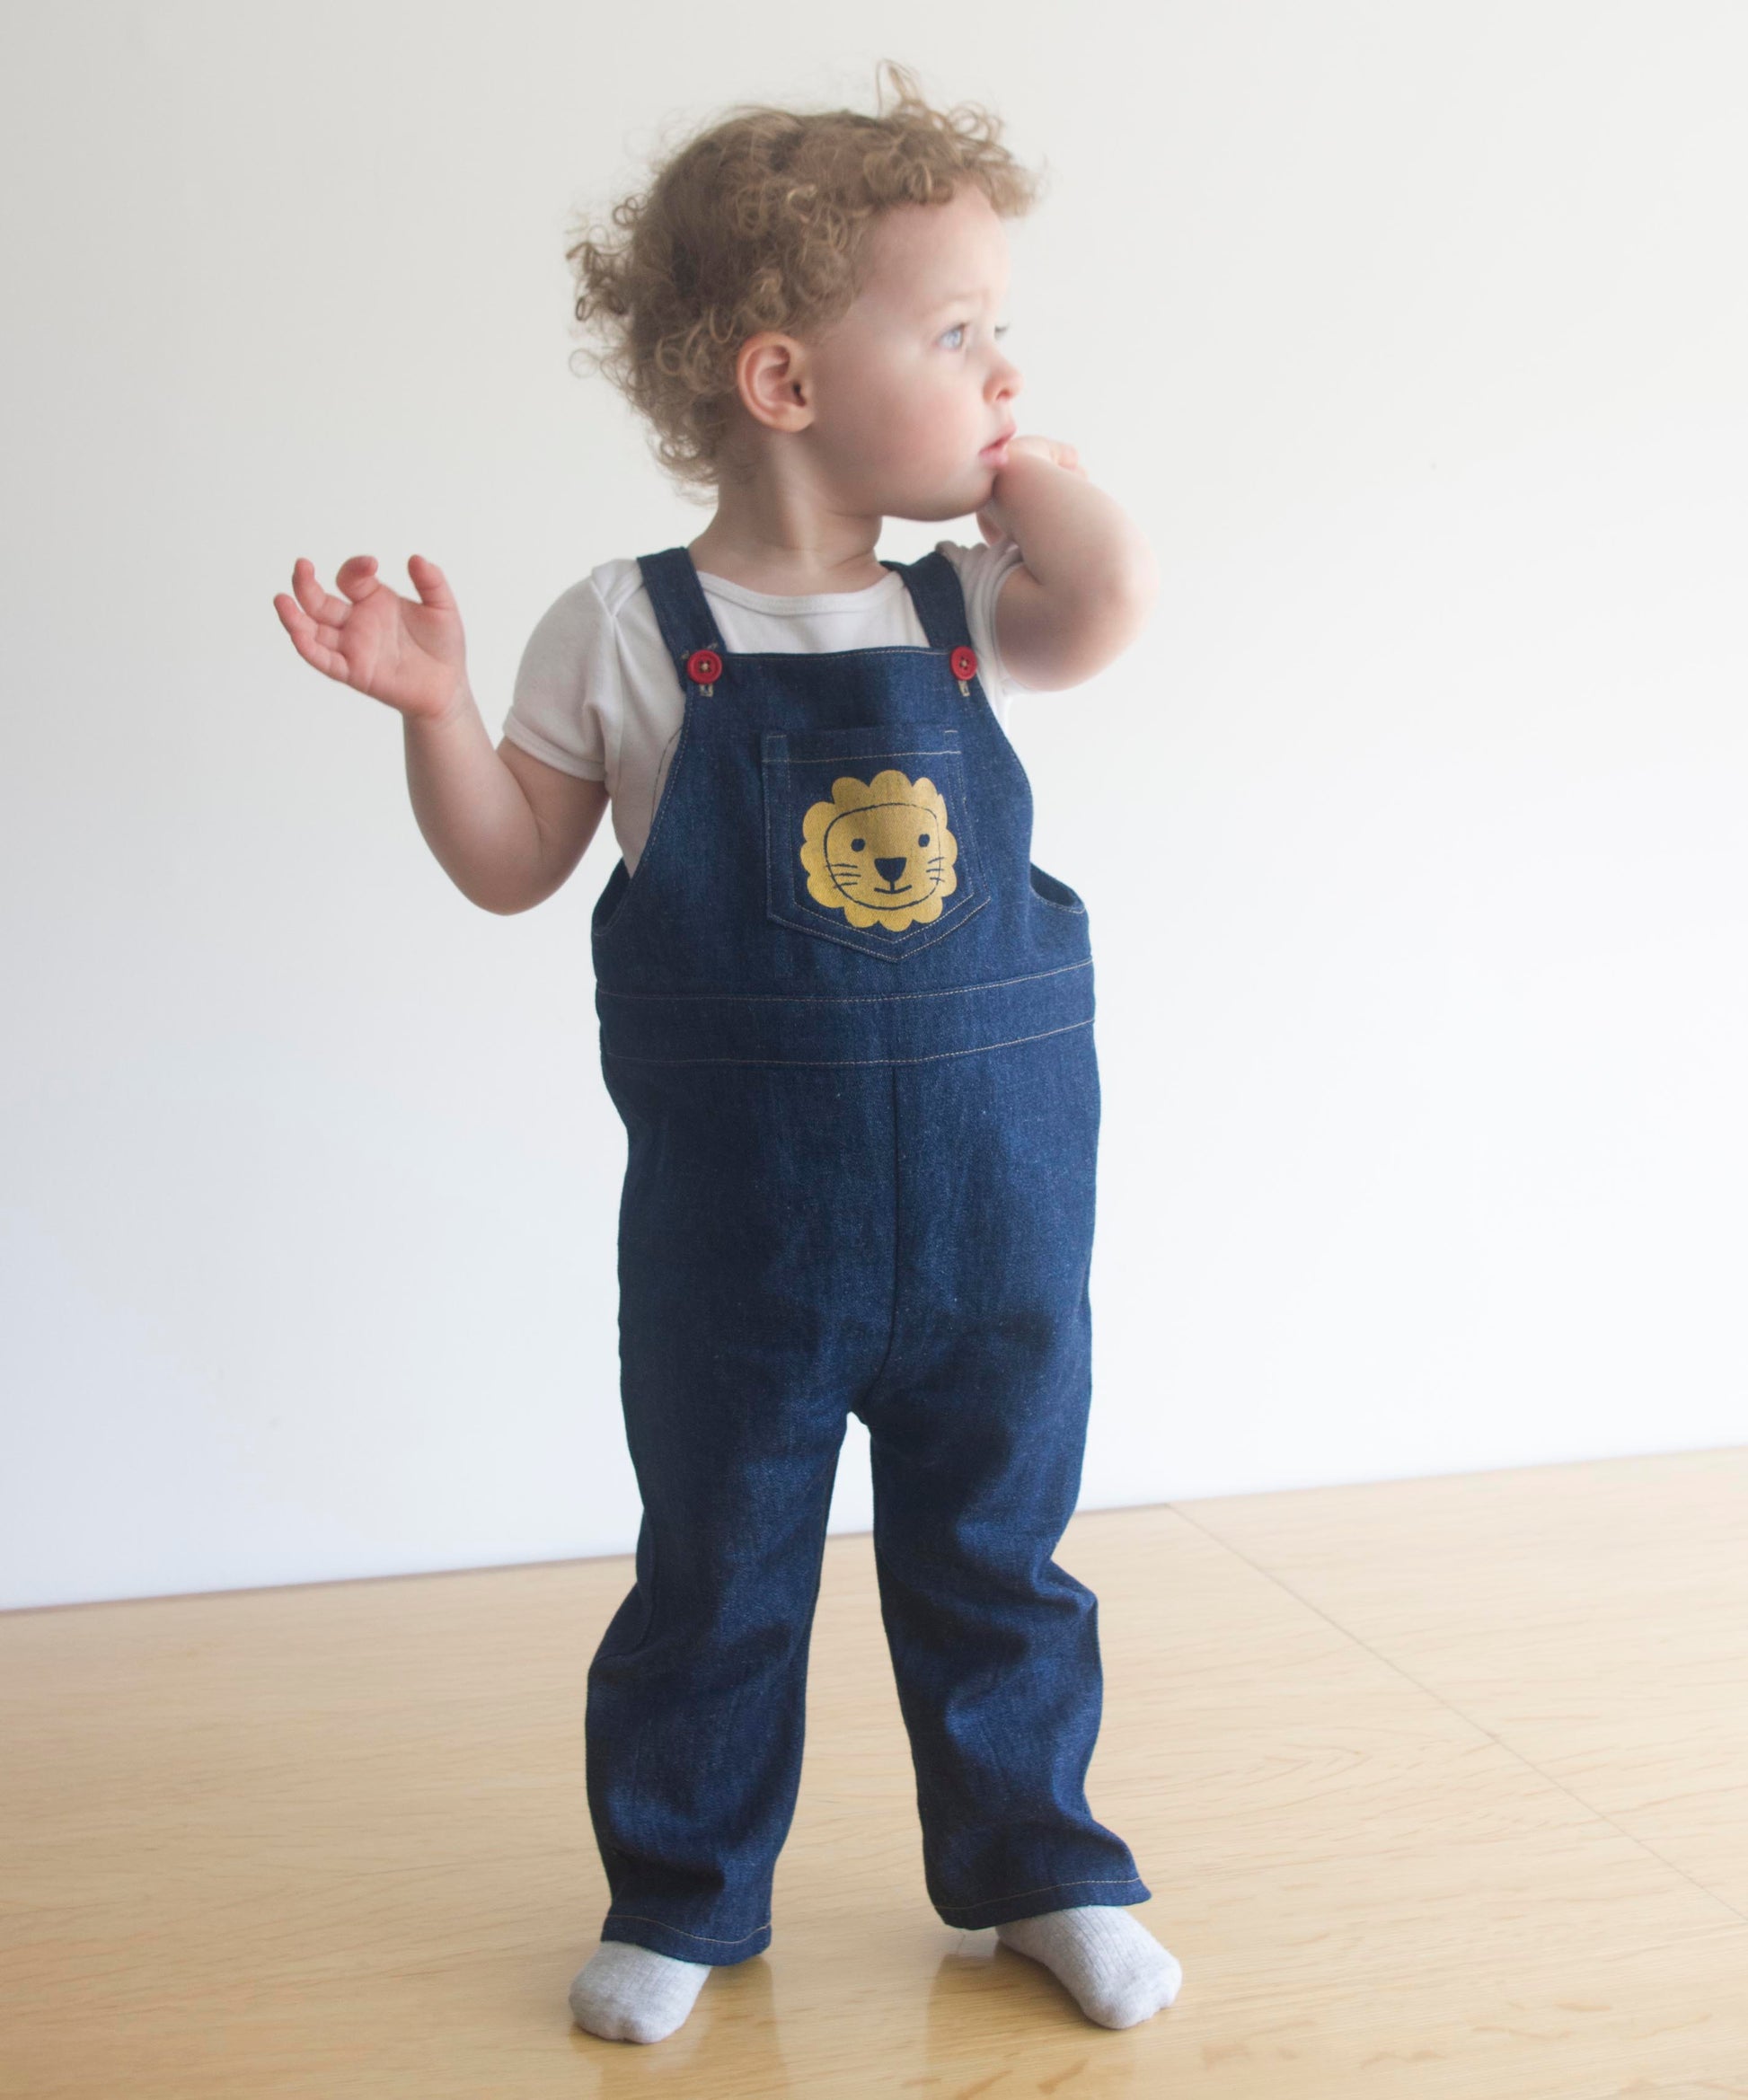 small child wearing overalls